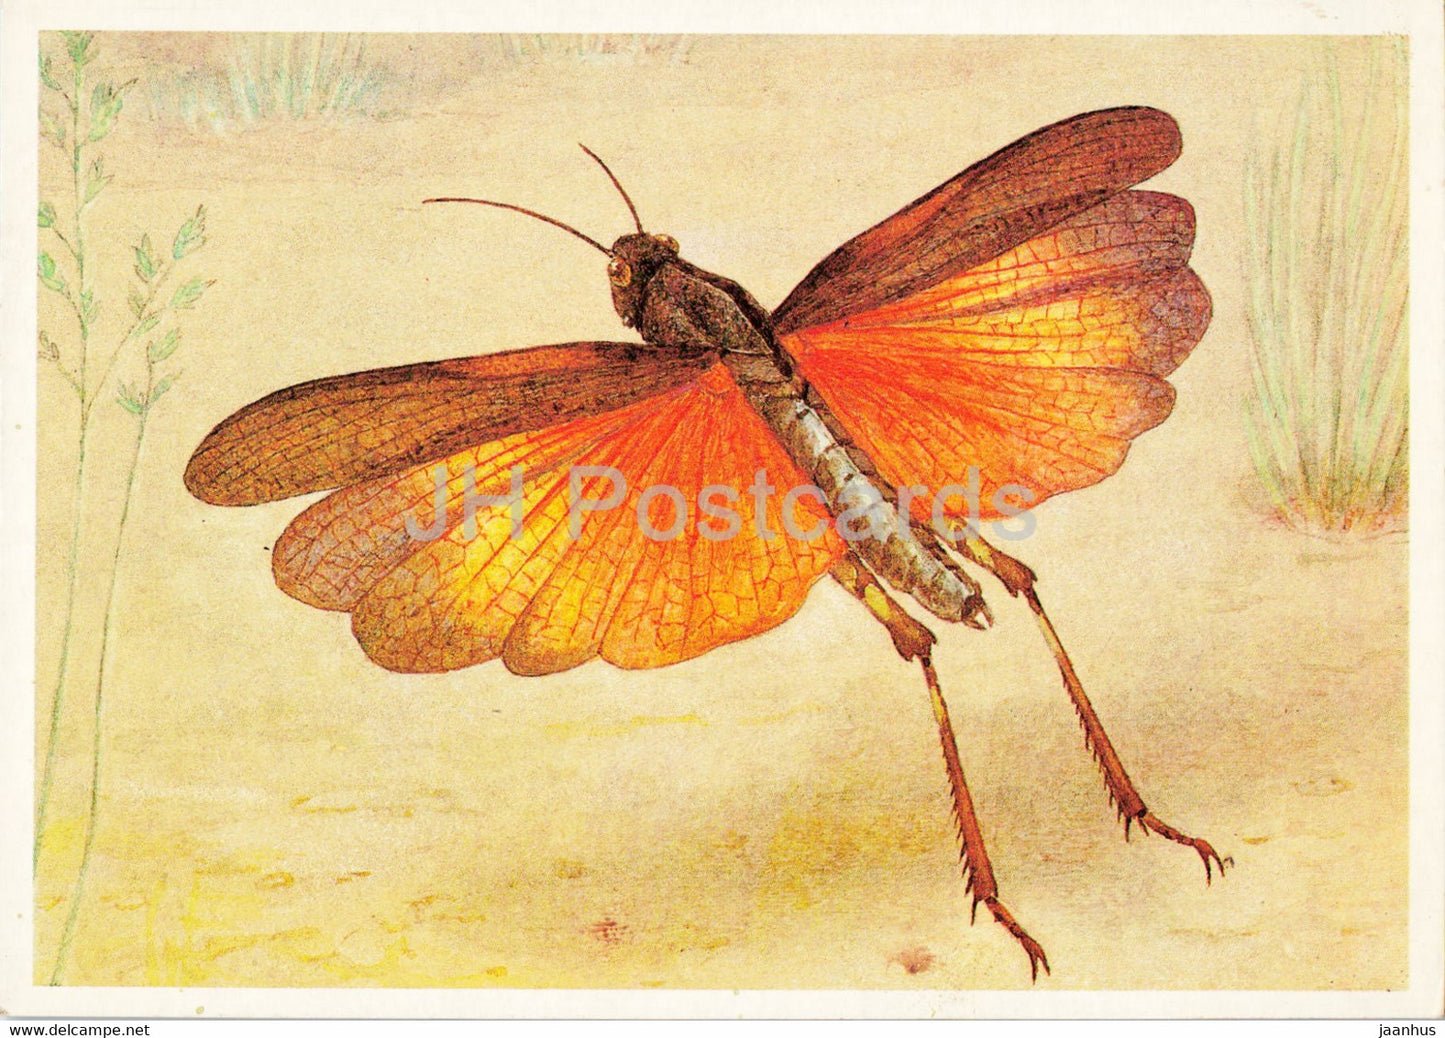 Psophus stridulus - The Rattle grasshopper - Insects - illustration - 1990 - Russia USSR - unused - JH Postcards